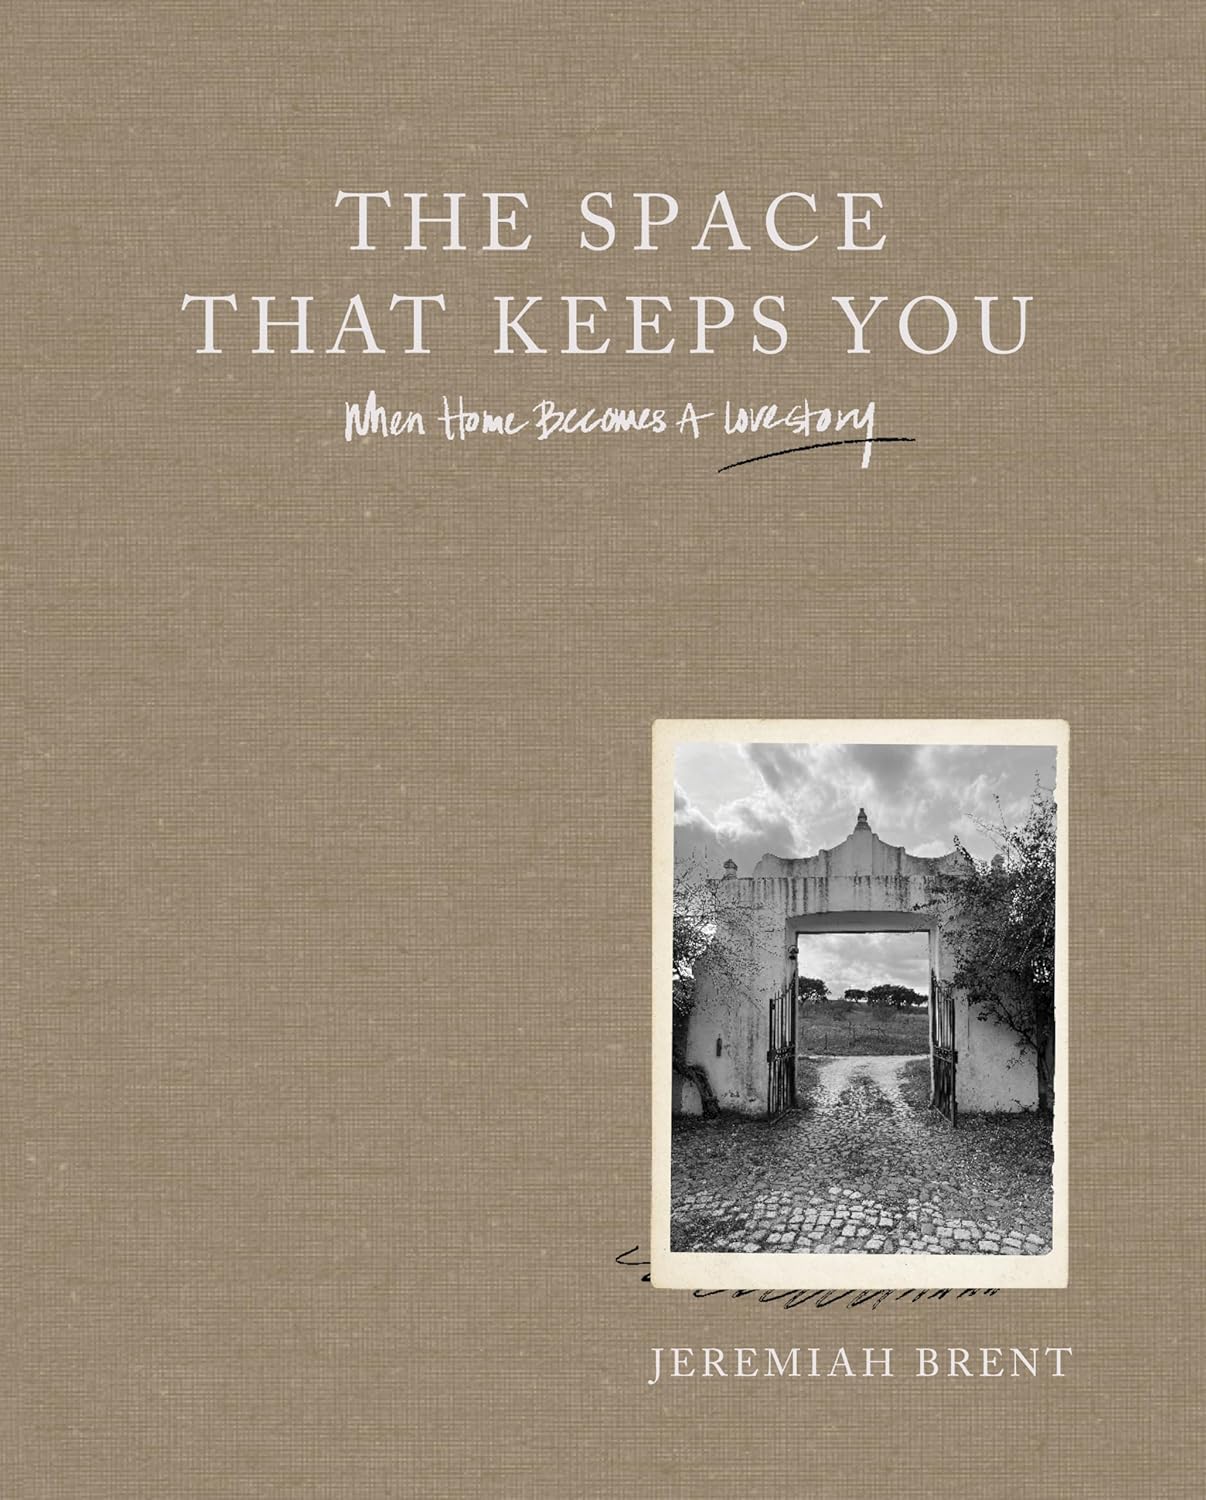 THE SPACE THAT KEEPS YOU by Jeremiah Brent (Harvest, 2024) - book cover. #jeremiahbrent #thespacethatkeepsyou